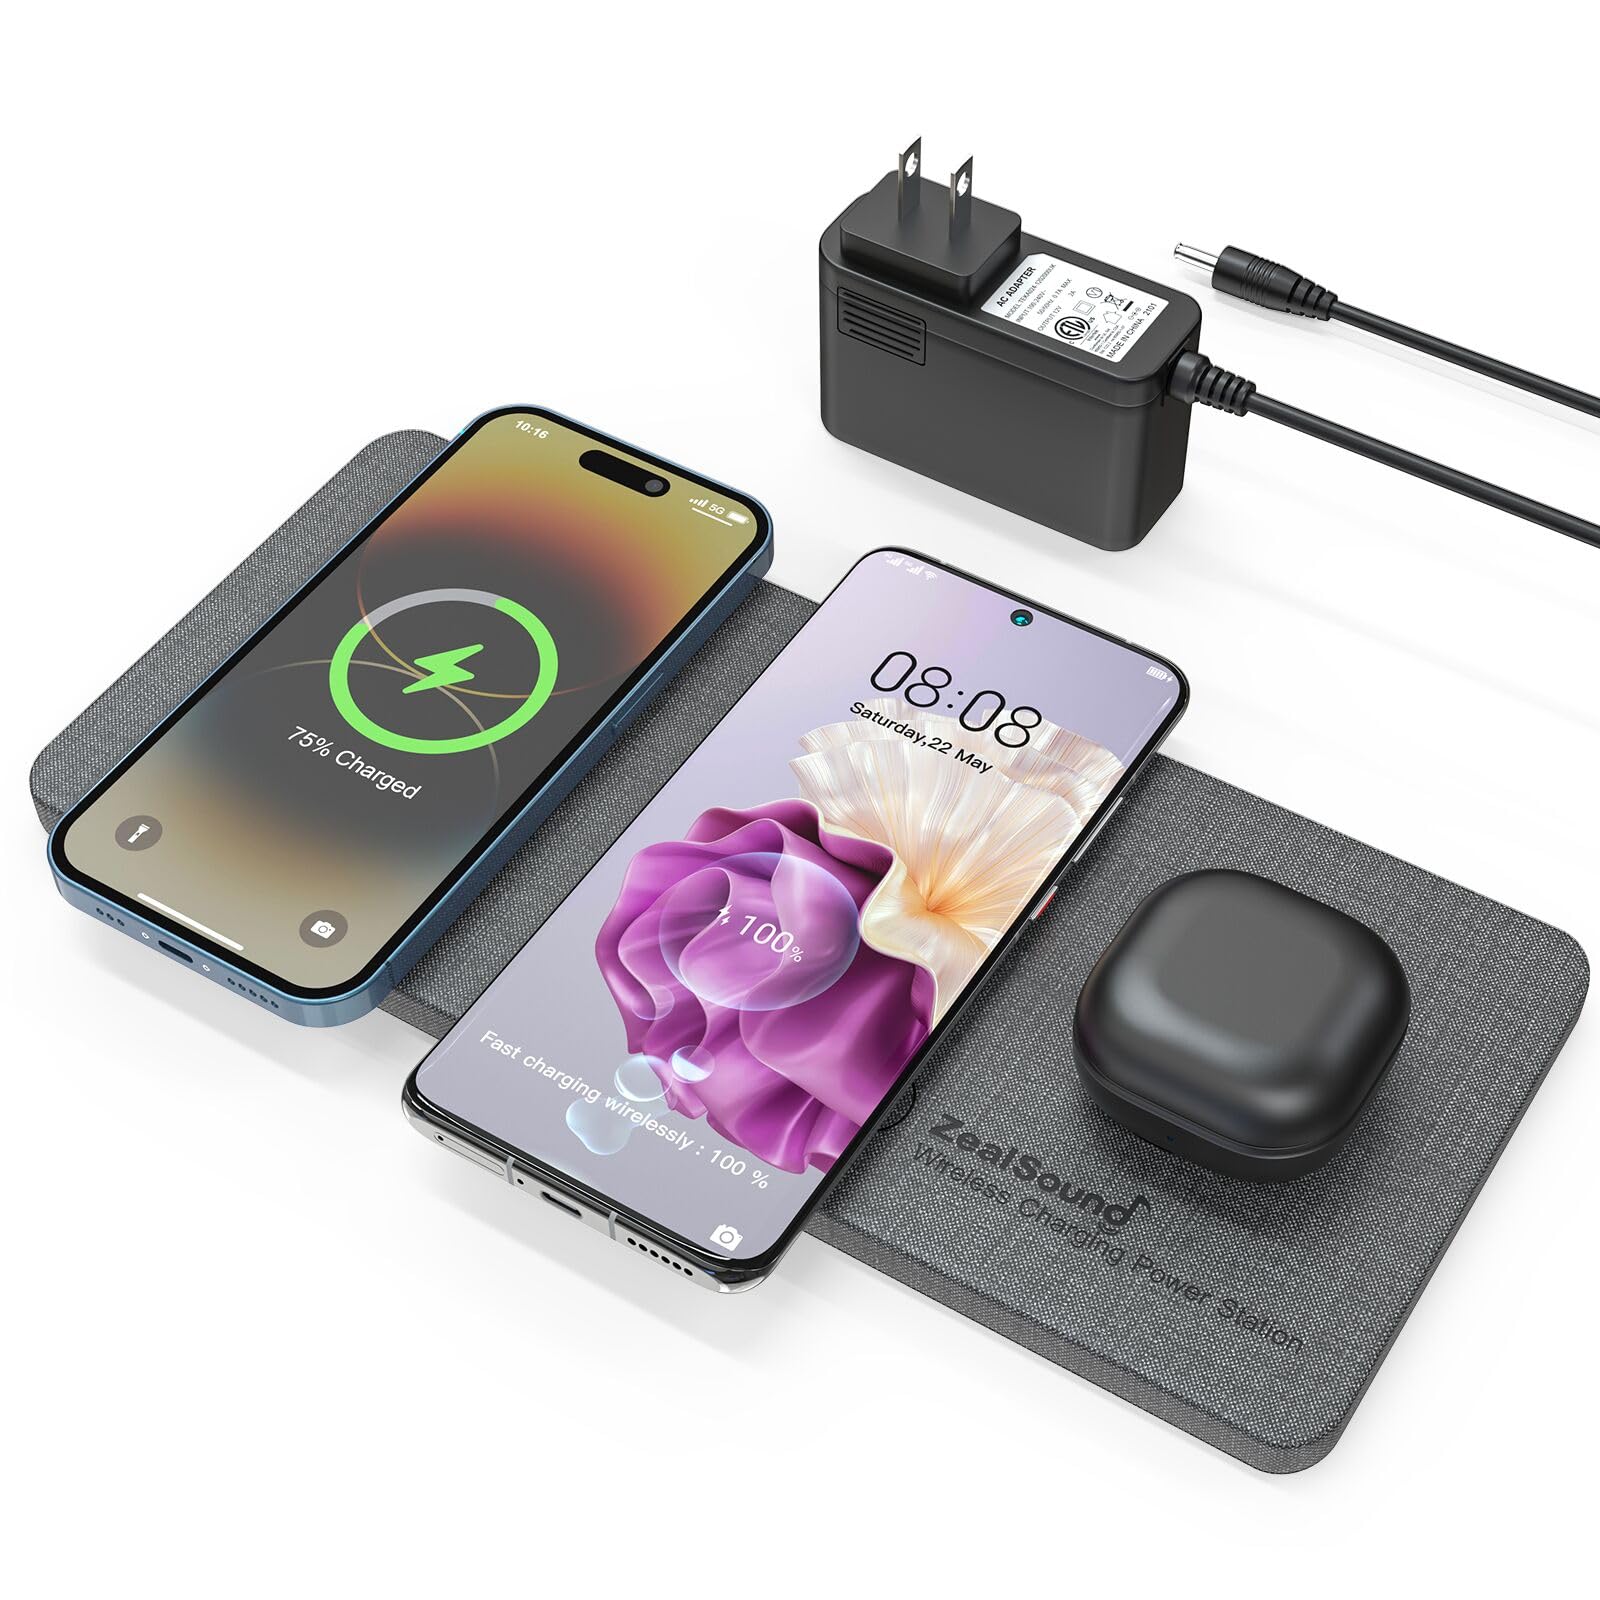 setting-up-wireless-charging-on-your-android-device-a-step-by-step-guide